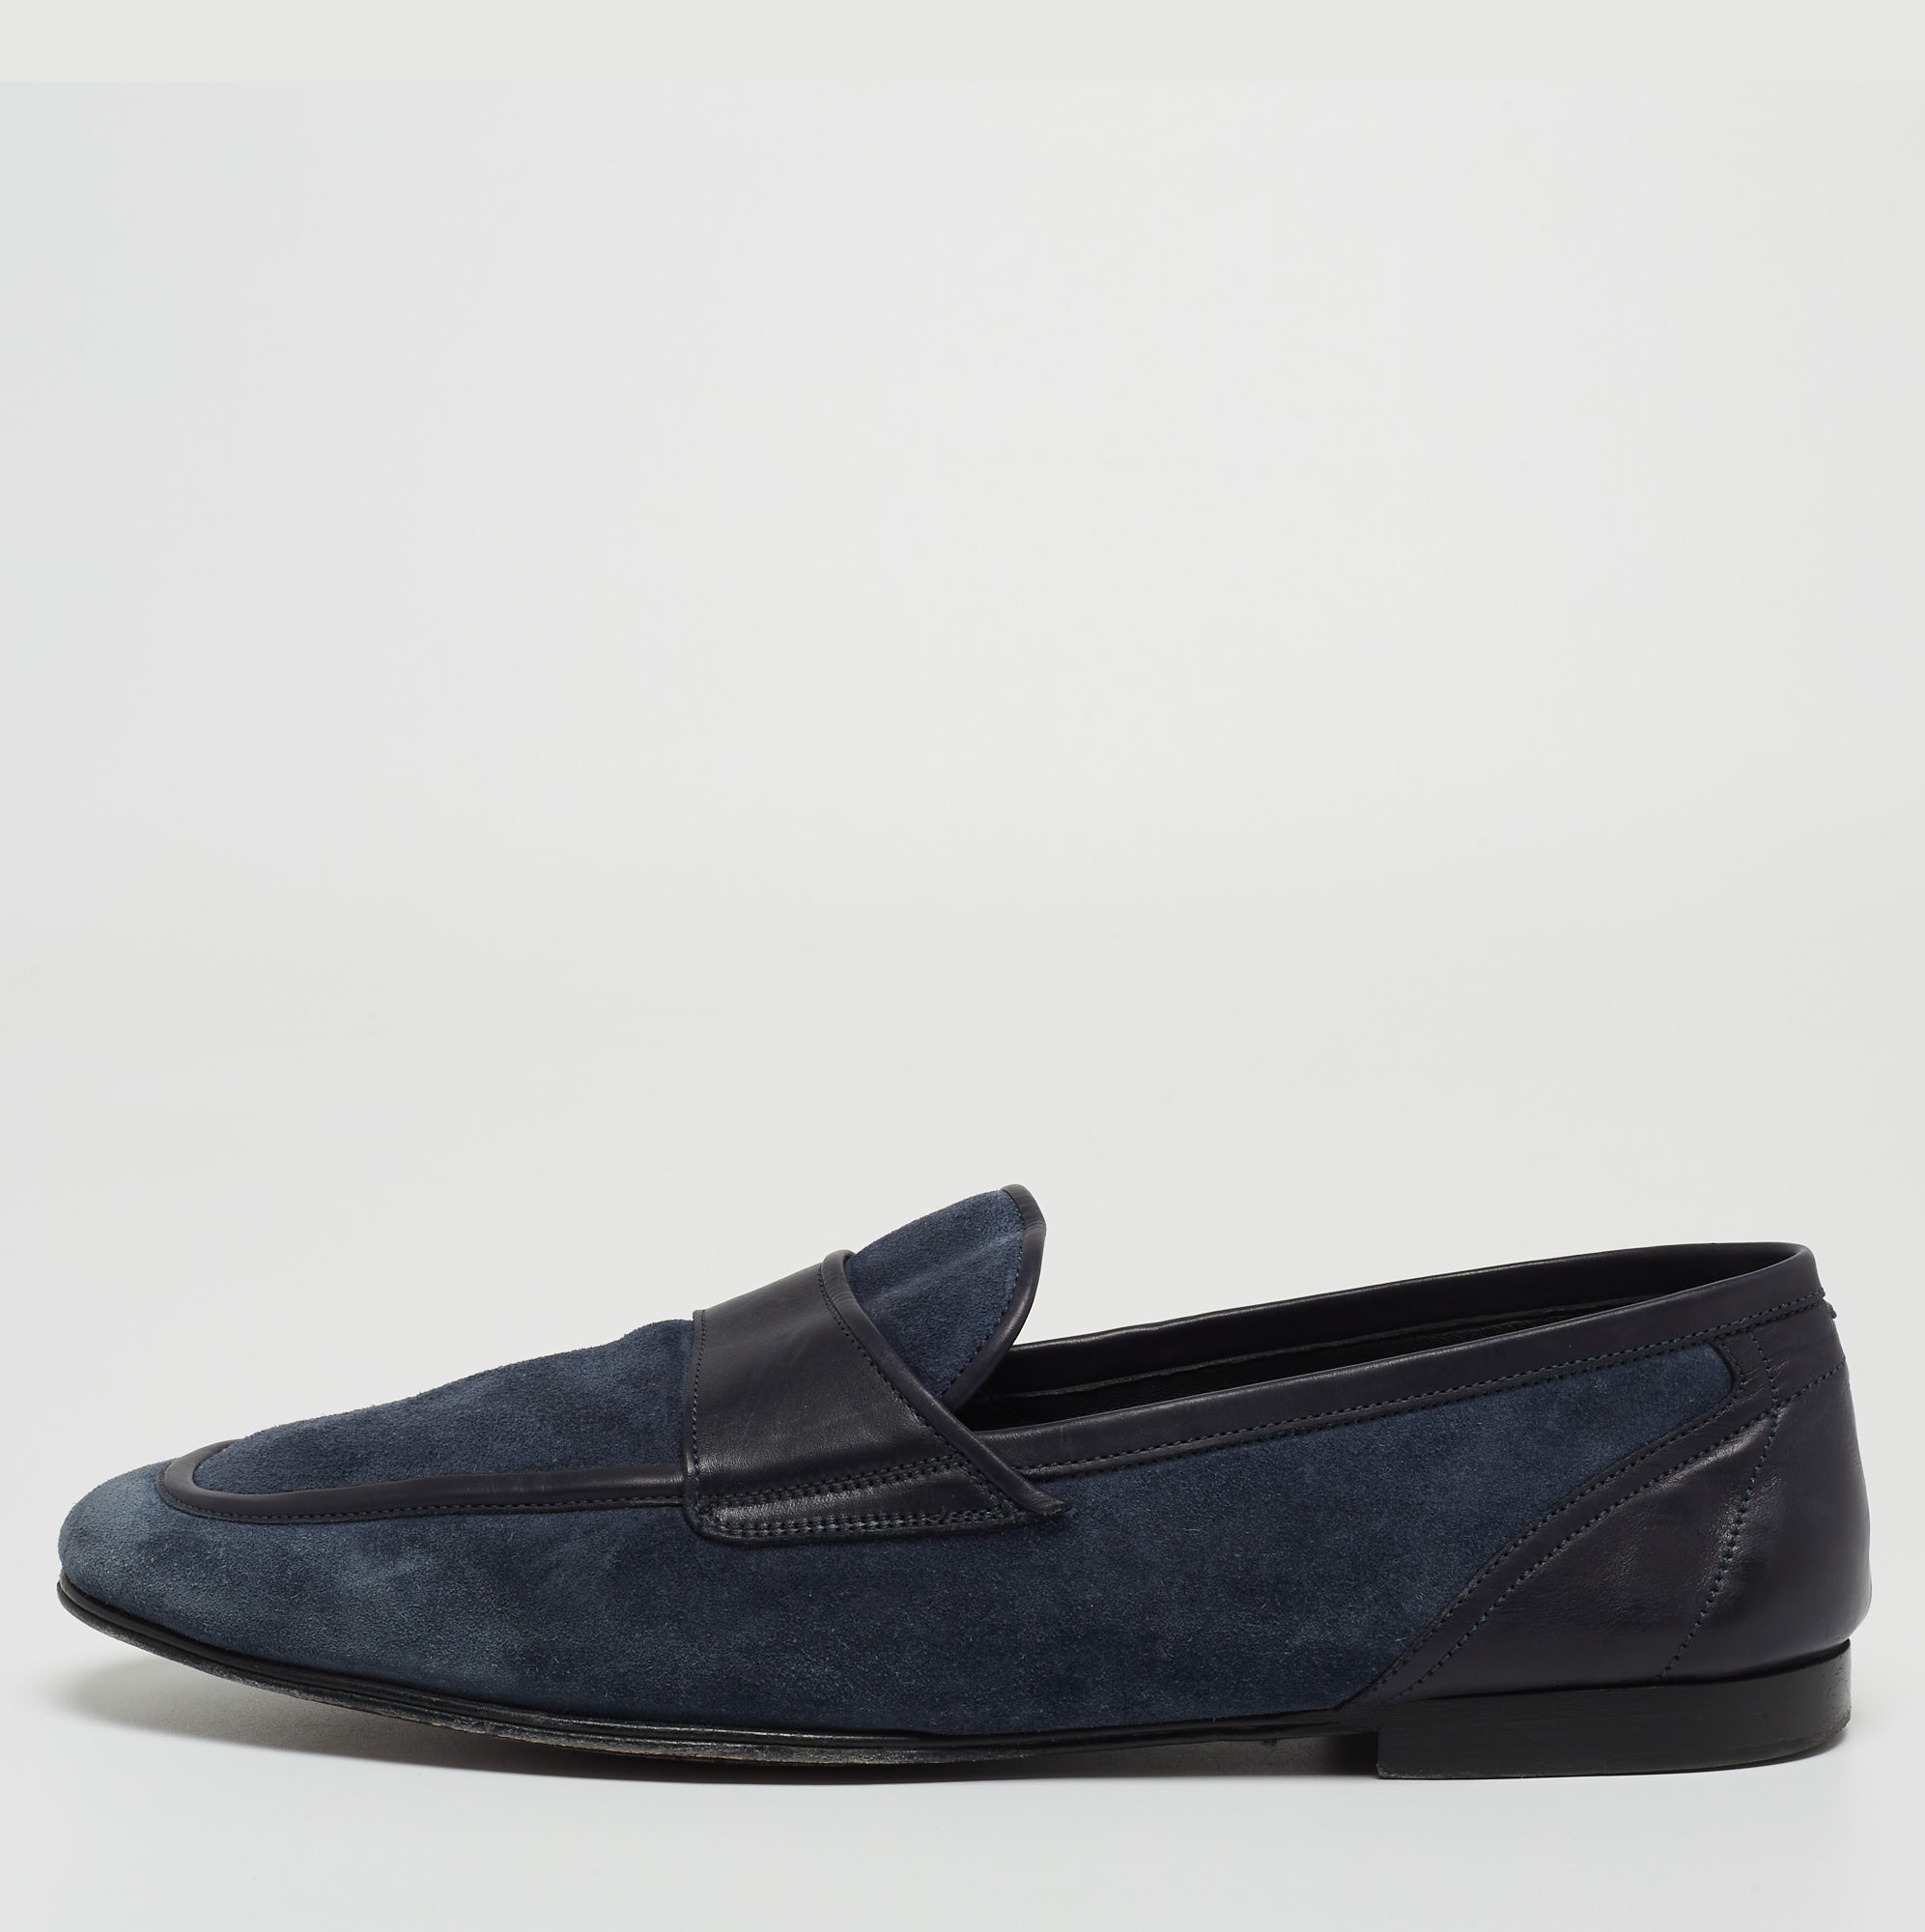 Dolce & Gabbana Navy Blue Suede Slip On Loafers Size 44